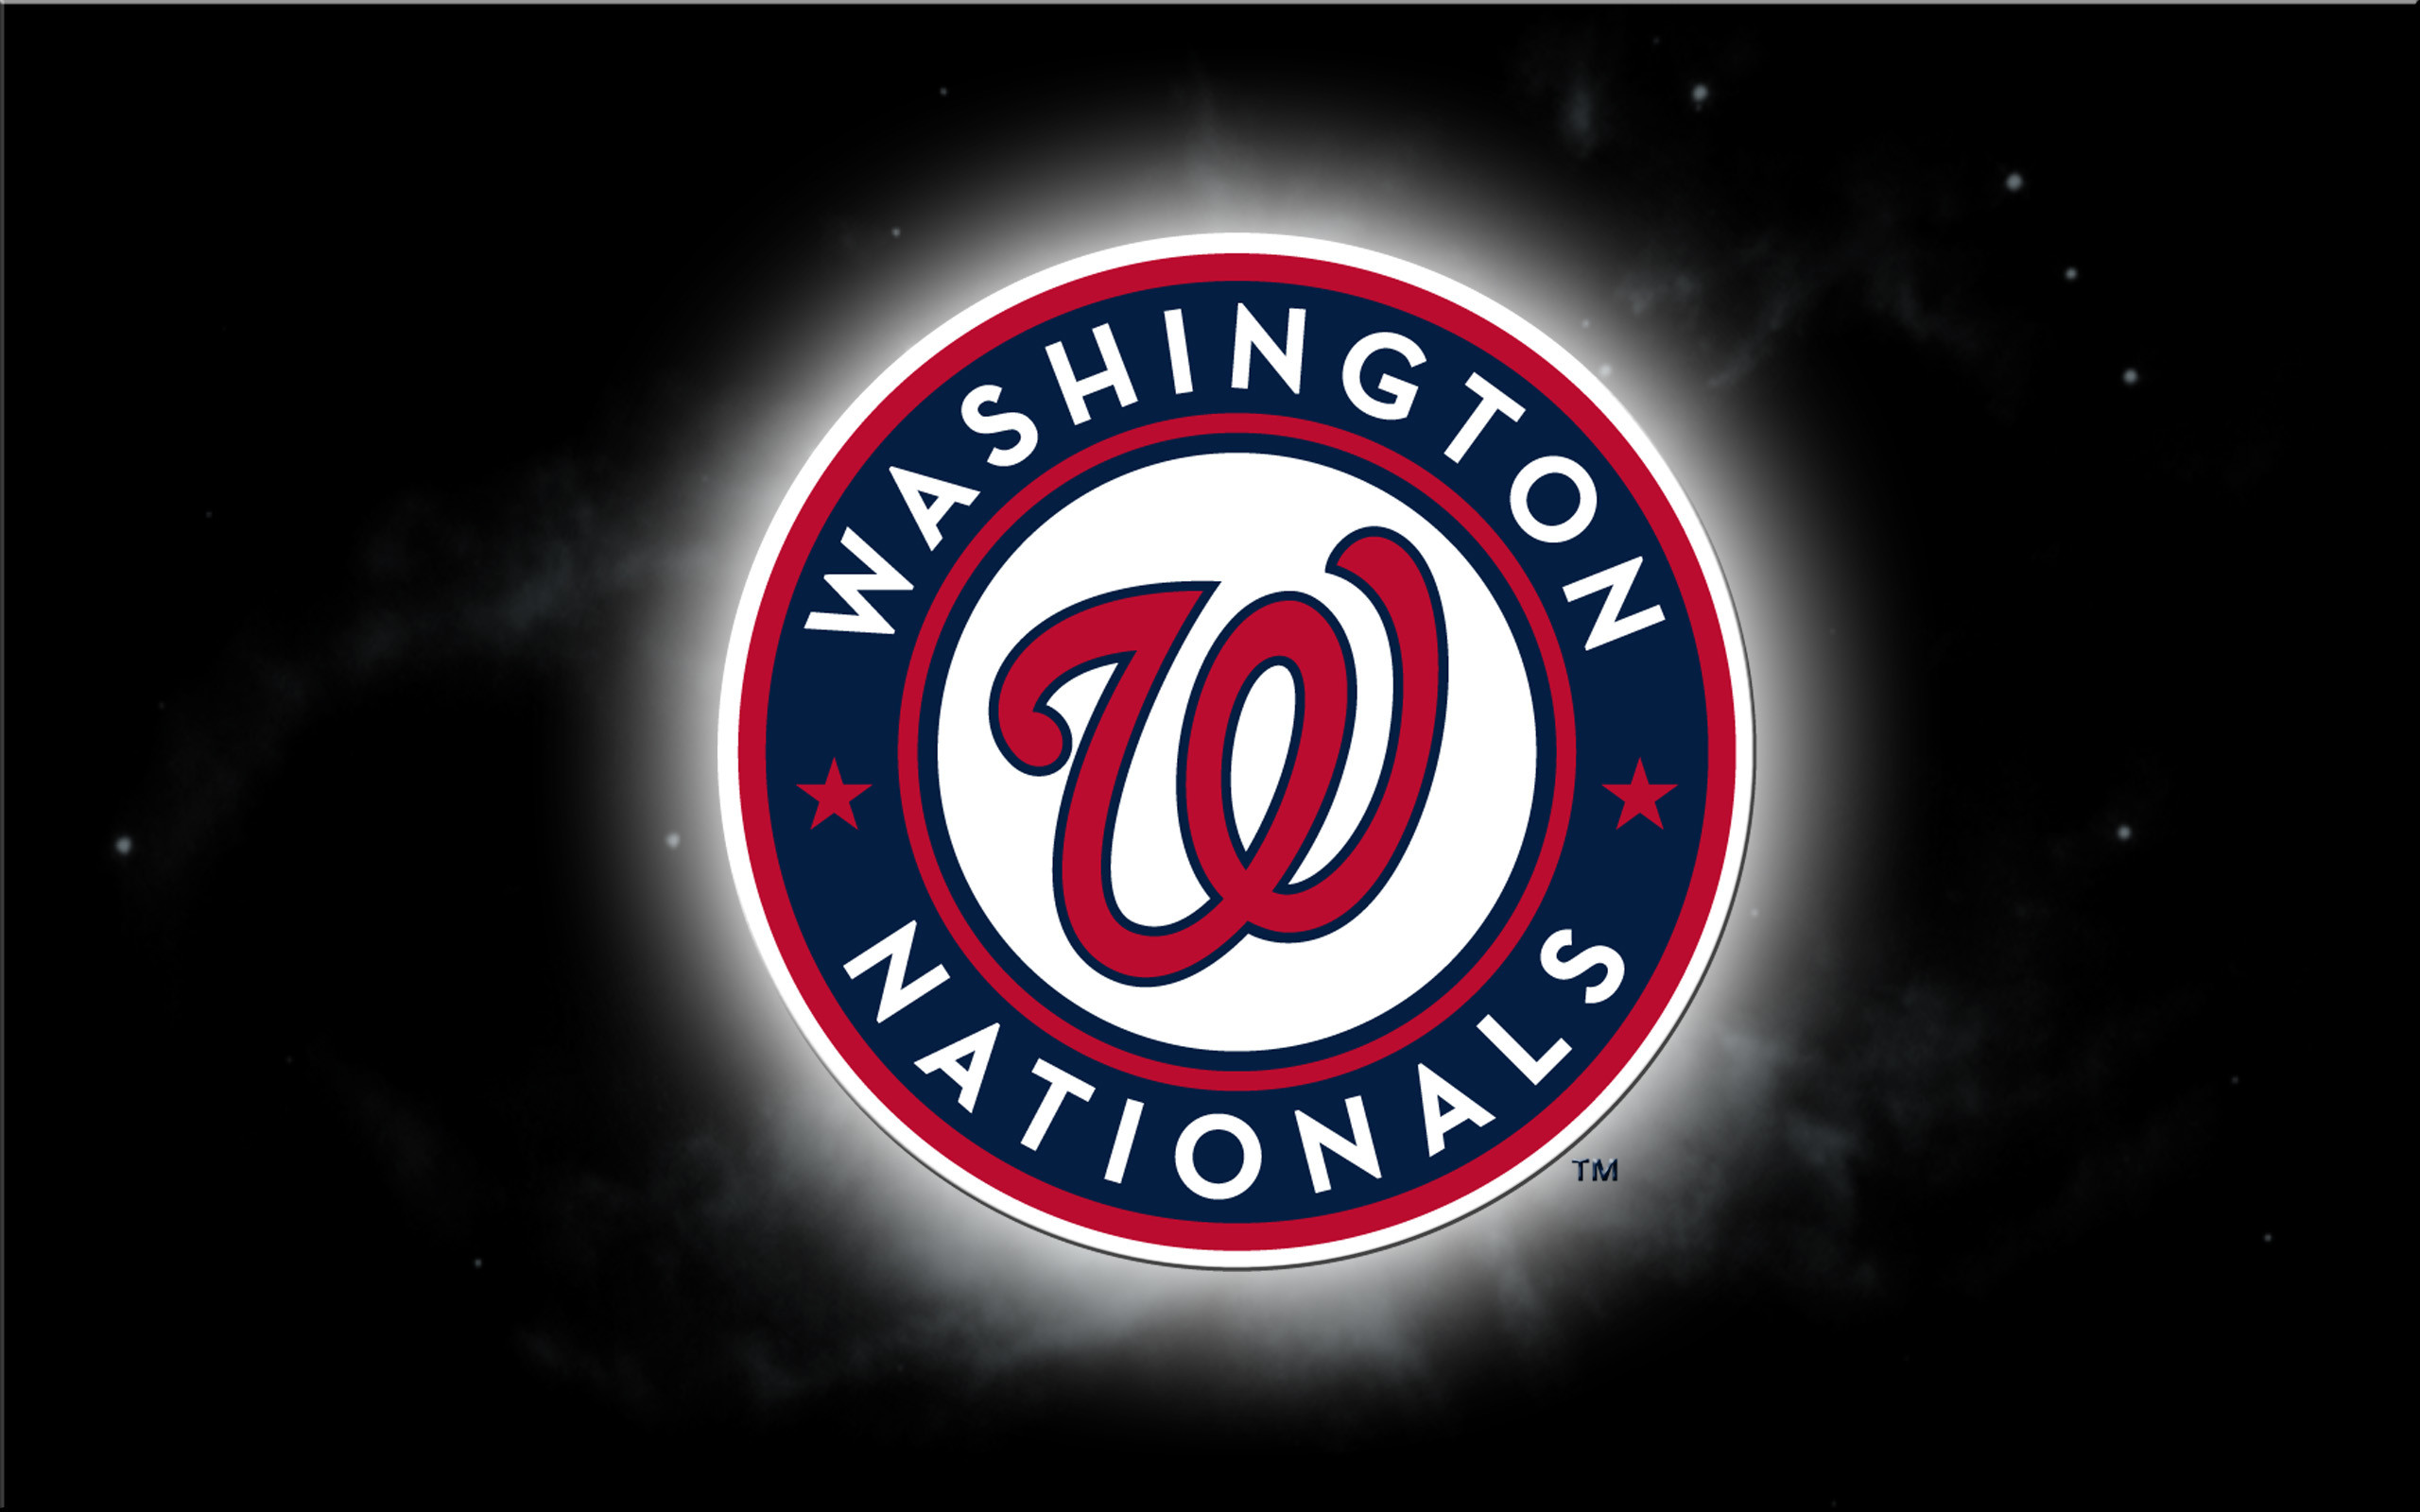 2560x1600 Washington Nationals Primary Logo - A red curly W with a blue outline  inside a blue circle with red outlines, two red stars, and Washington  Nationals in ...